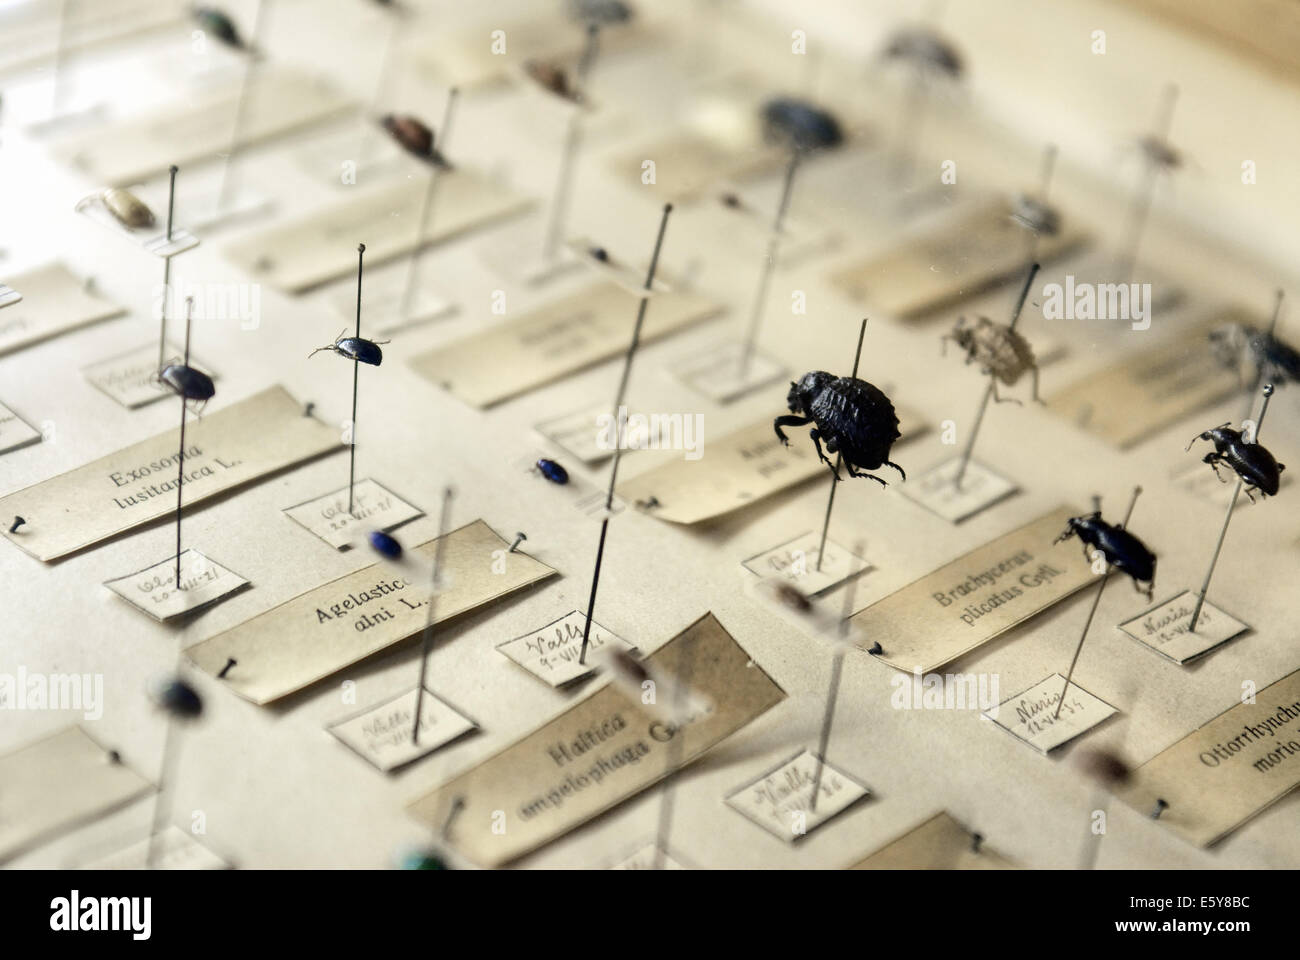 collection of insect specimen Stock Photo